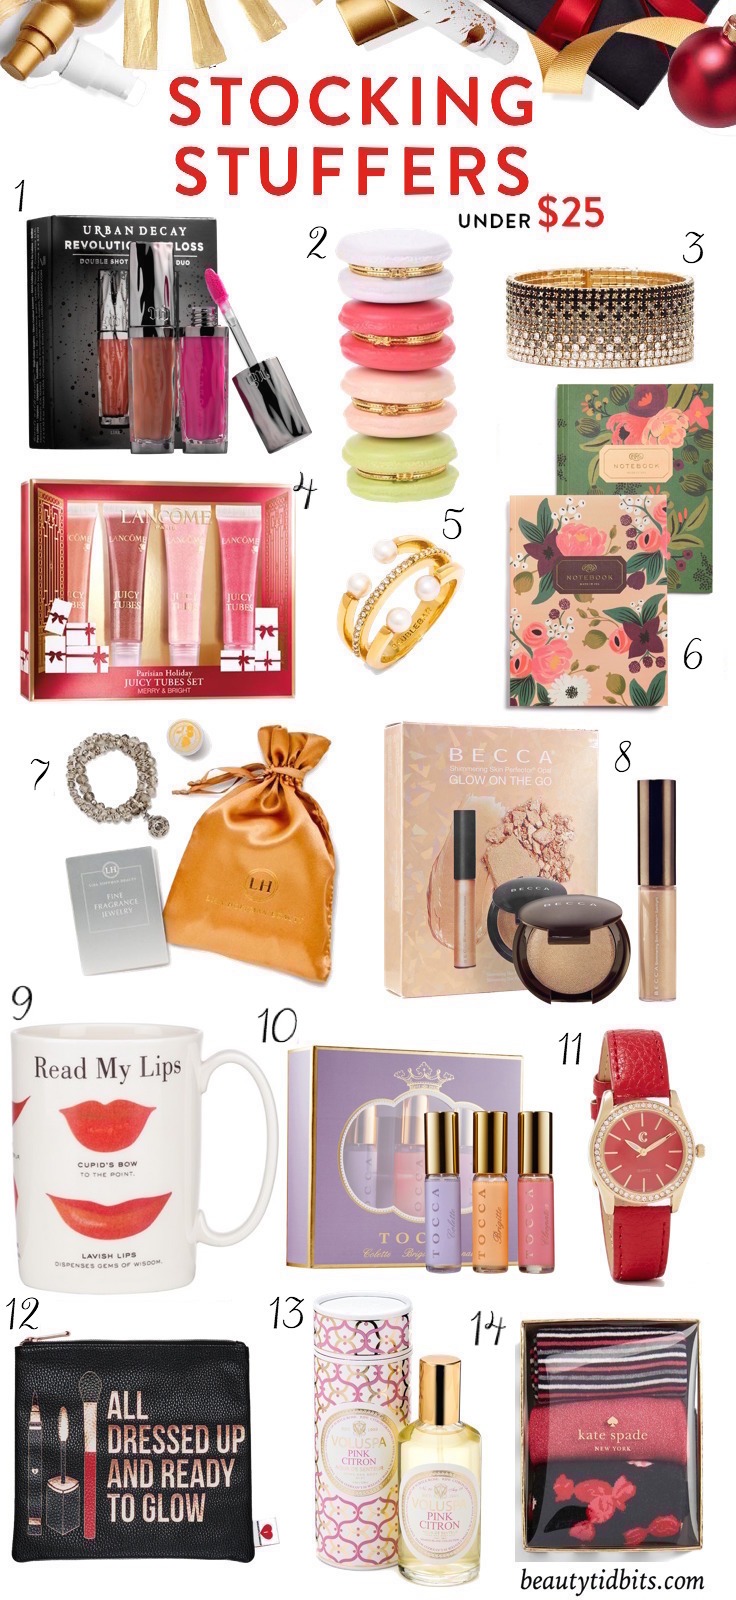 Need some ideas to stuff those stockings? Here are 25 chic beauty & style picks under $25 that are sure to please!